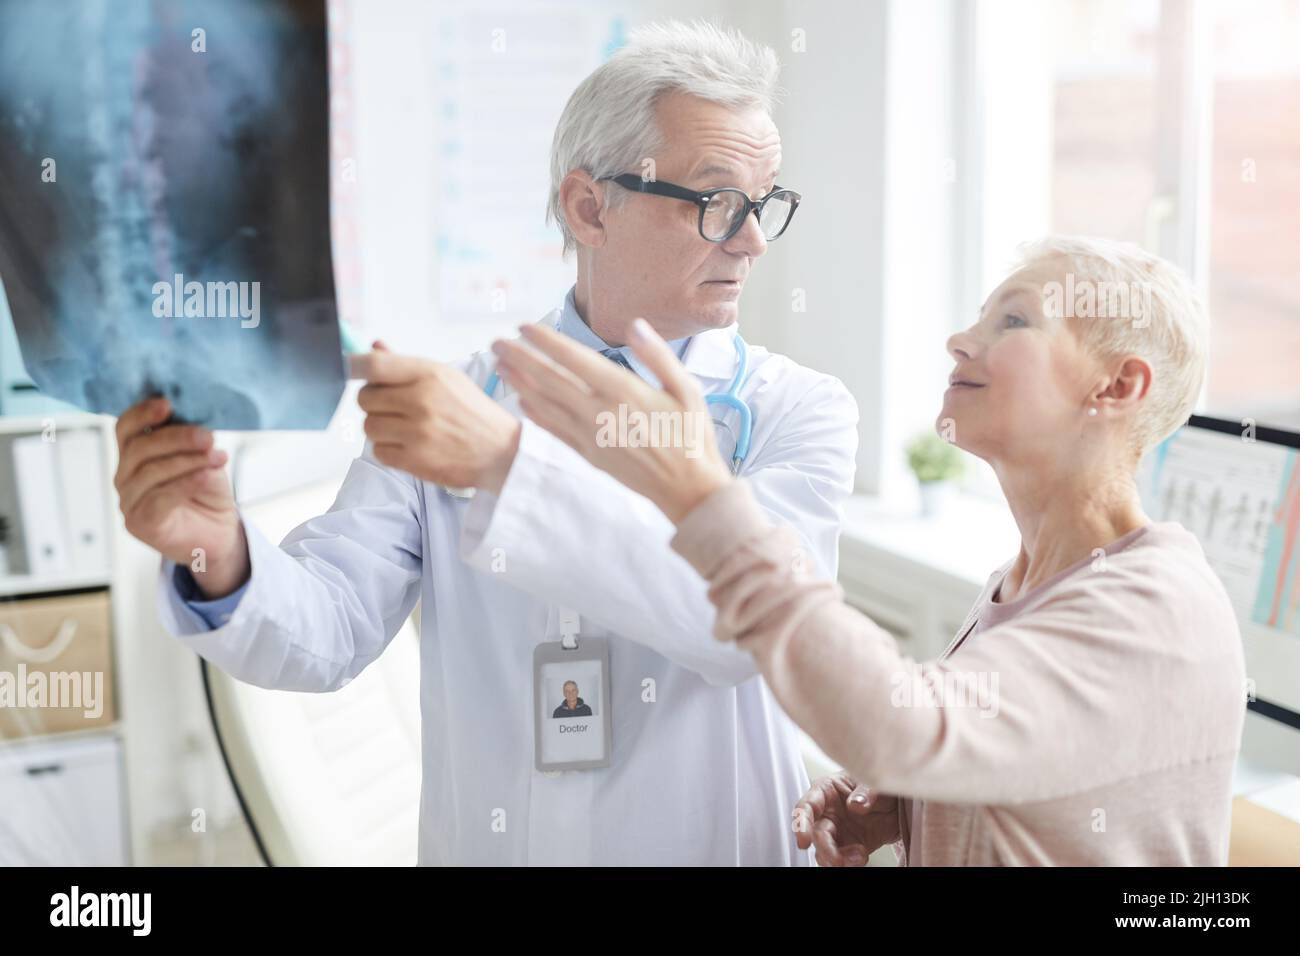 Attractive blond-haired mature lady pointing at core x-ray image while discussing her pain with doctor Stock Photo